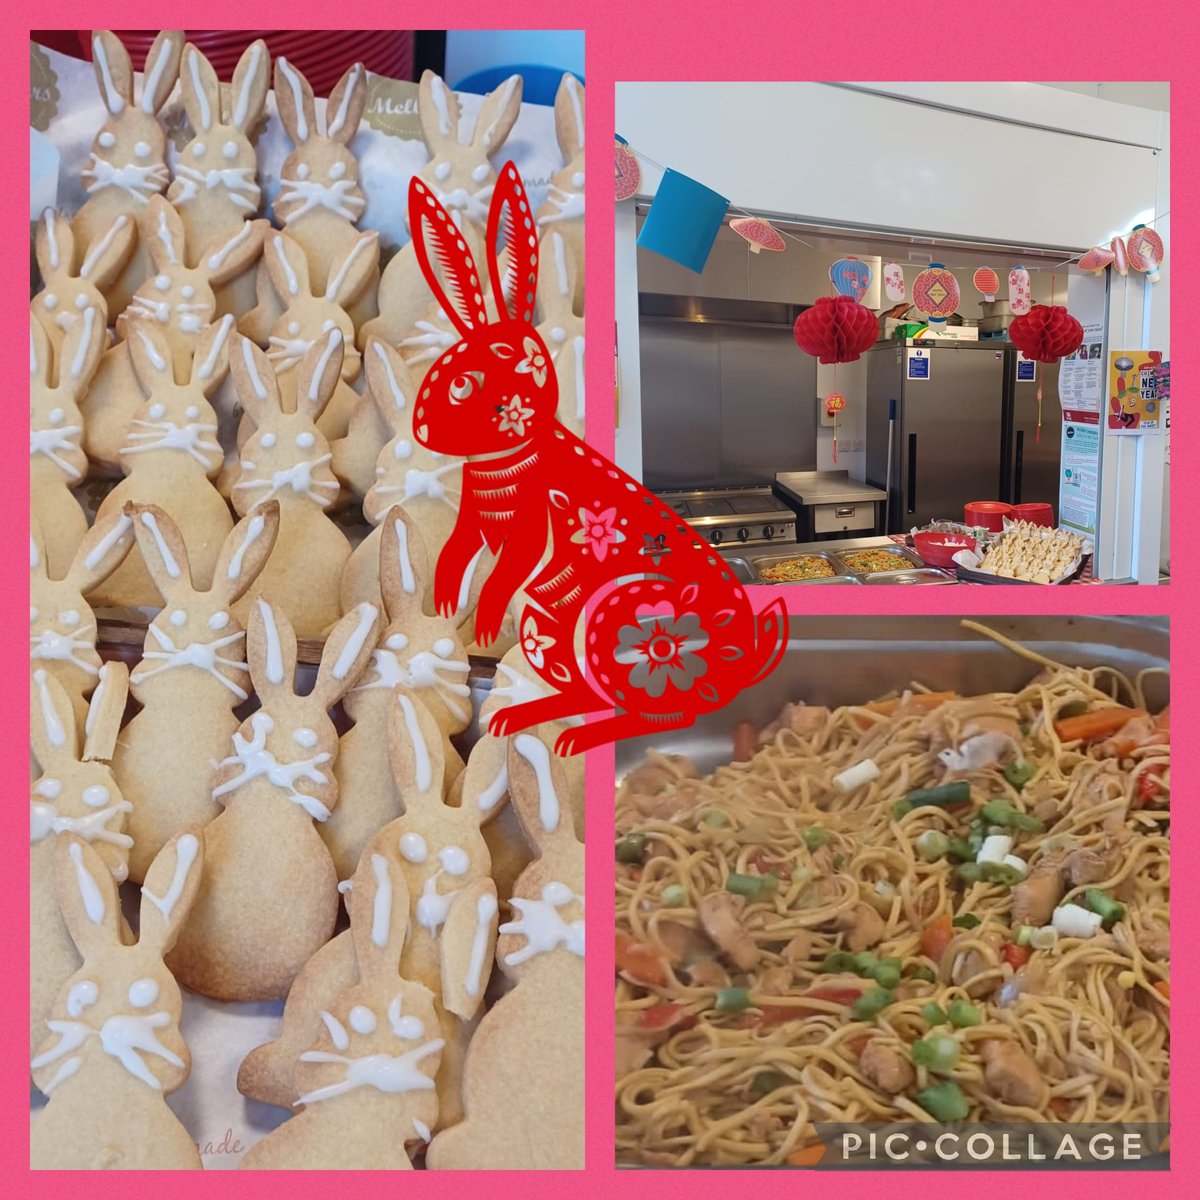 Celebrating Chinese New Year @epplebyforcett today well done Lisa those noodles are making me hungry 😋 @NeilEastwood11 @mellorscatering